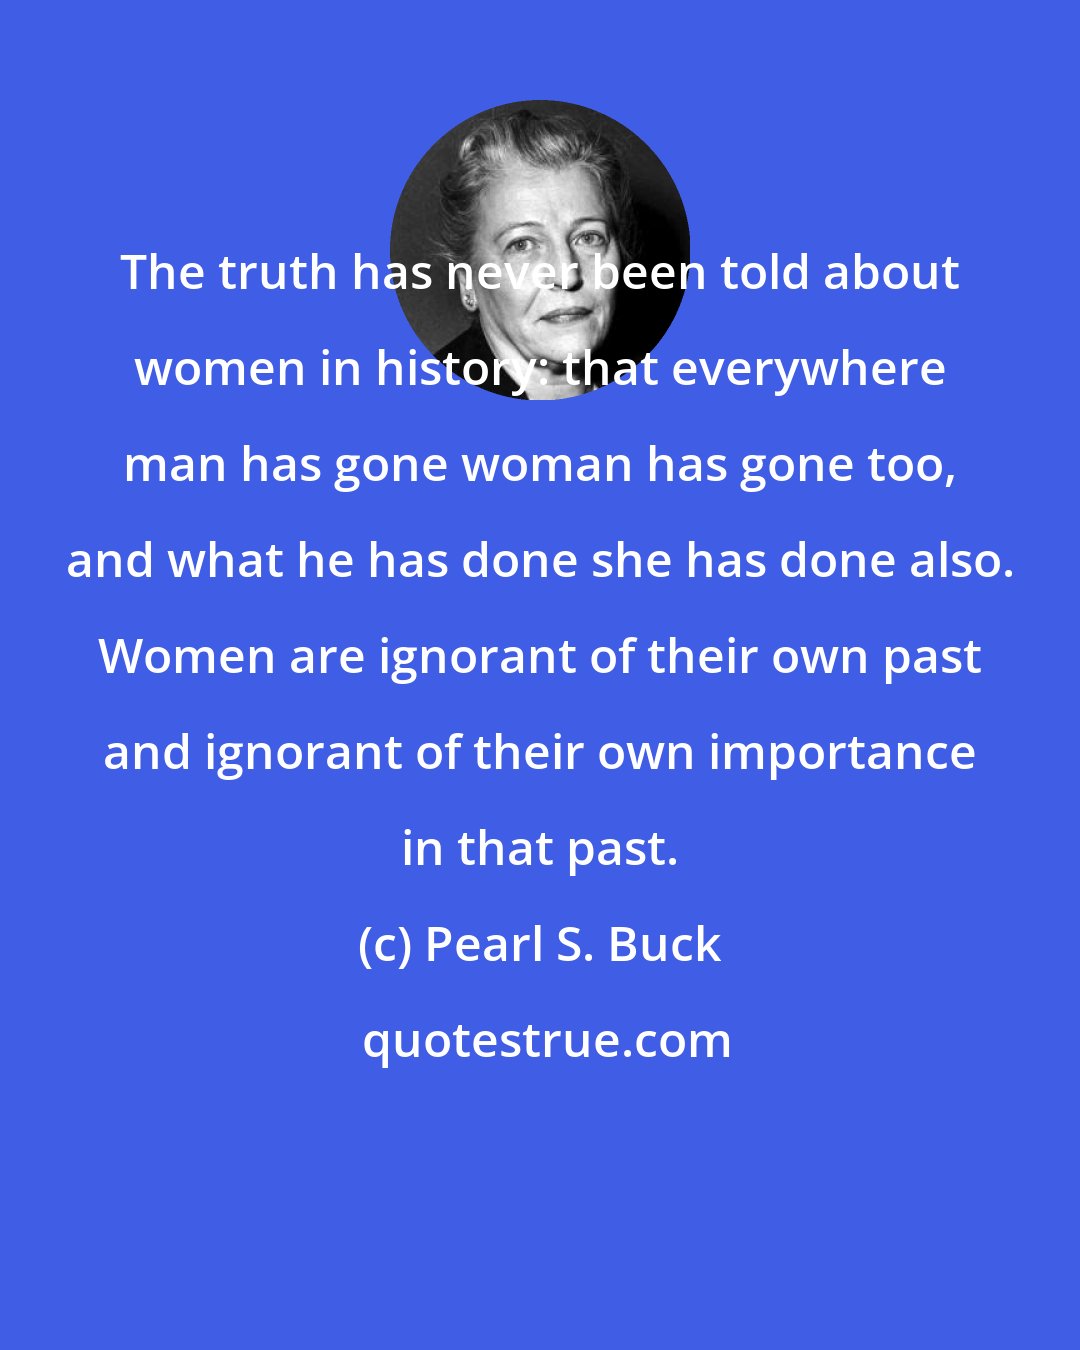 Pearl S. Buck: The truth has never been told about women in history: that everywhere man has gone woman has gone too, and what he has done she has done also. Women are ignorant of their own past and ignorant of their own importance in that past.